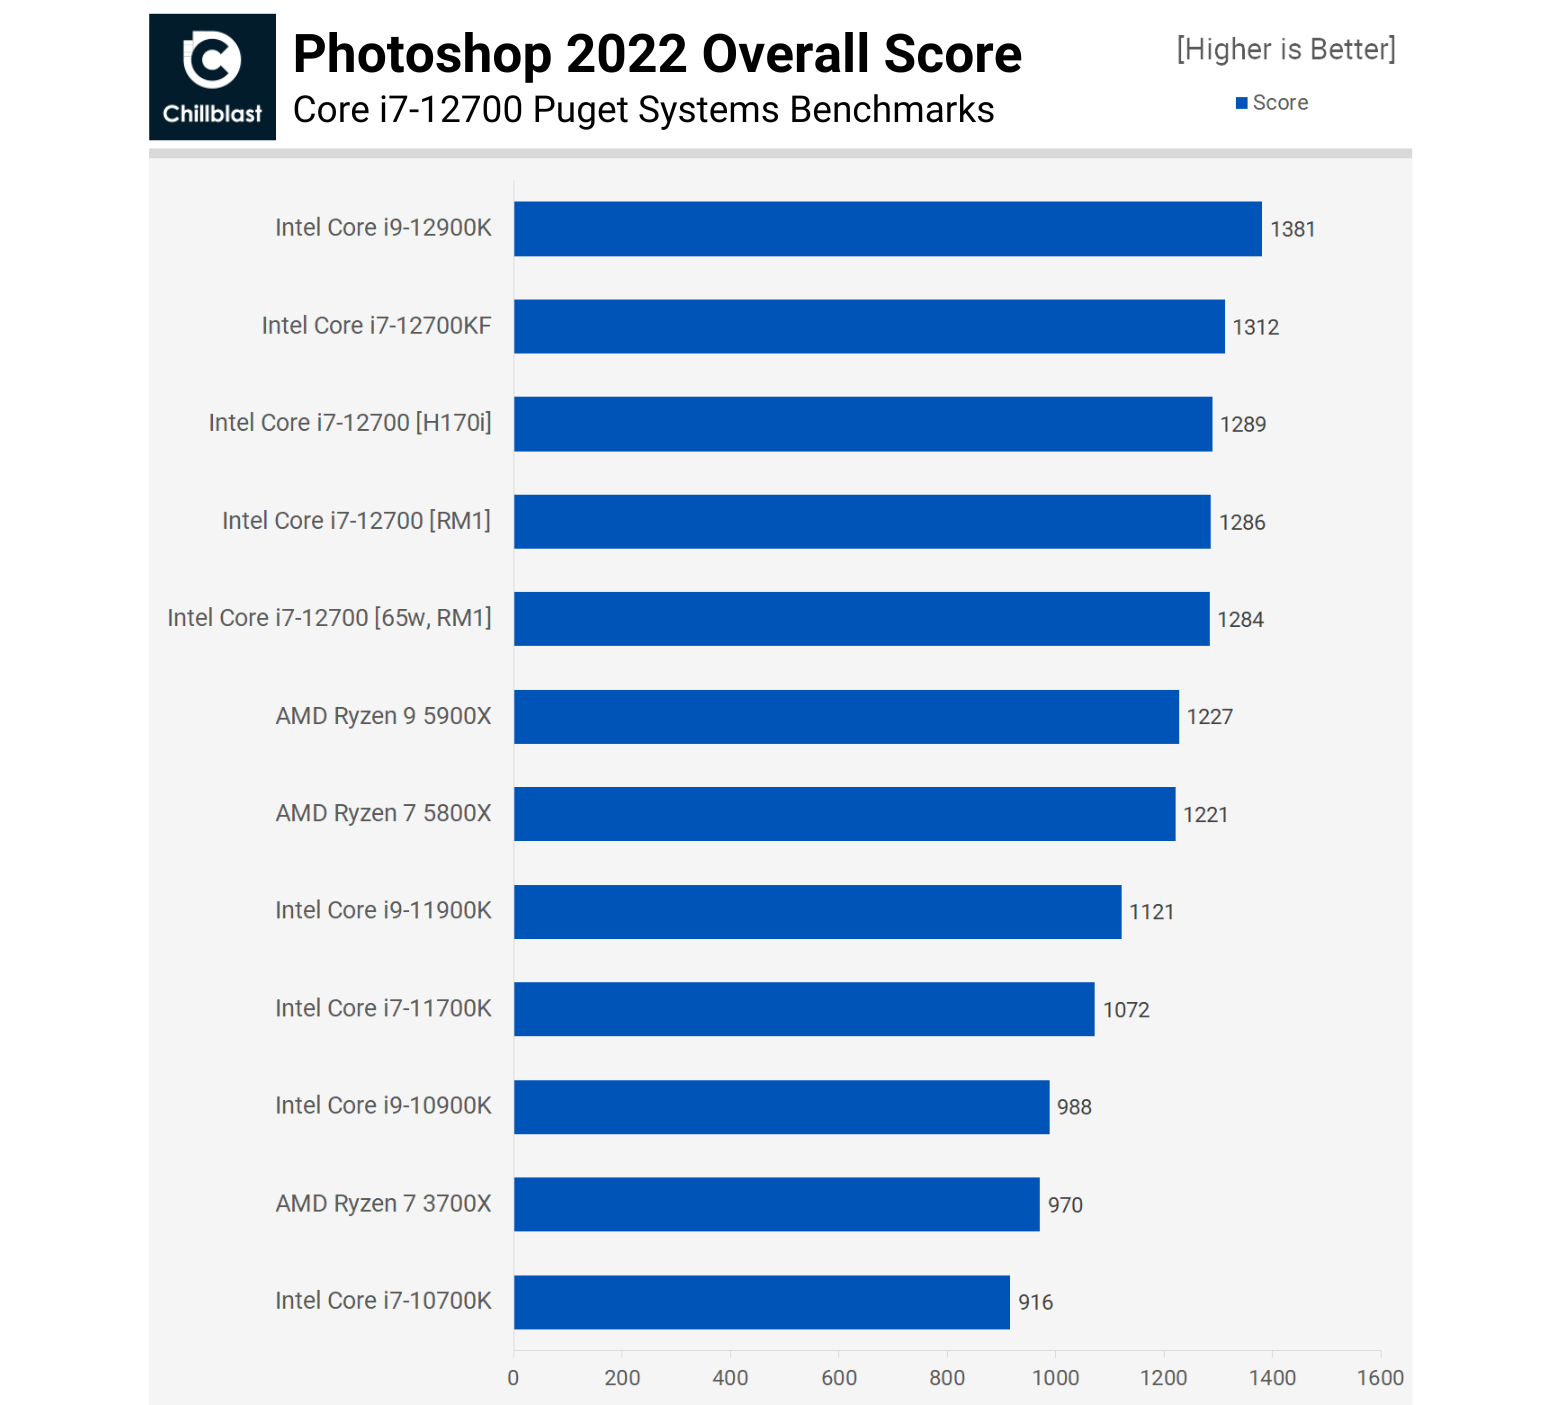 Best CPU for Photoshop - Intel Core i7-12700